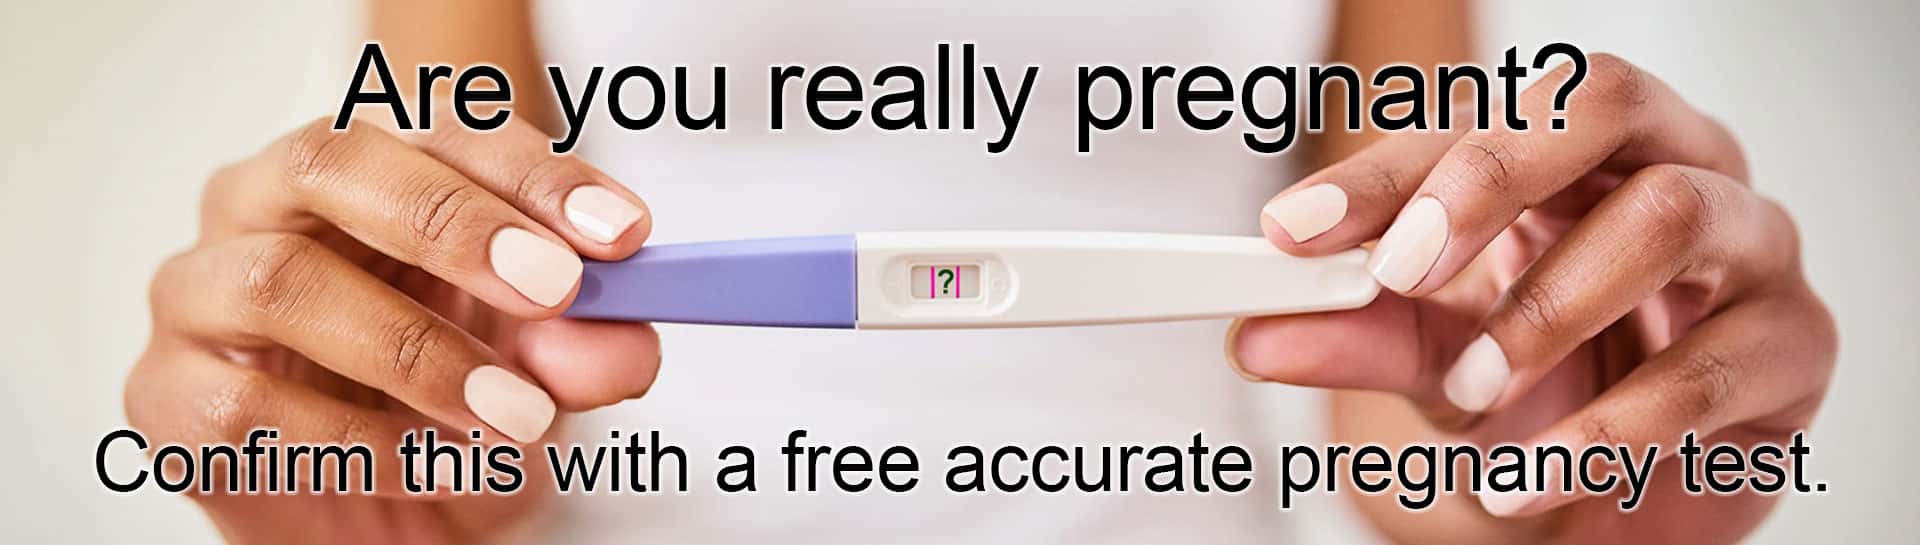 Woman holding a pregnancy test and needs a free pregnancy test in Virginia.